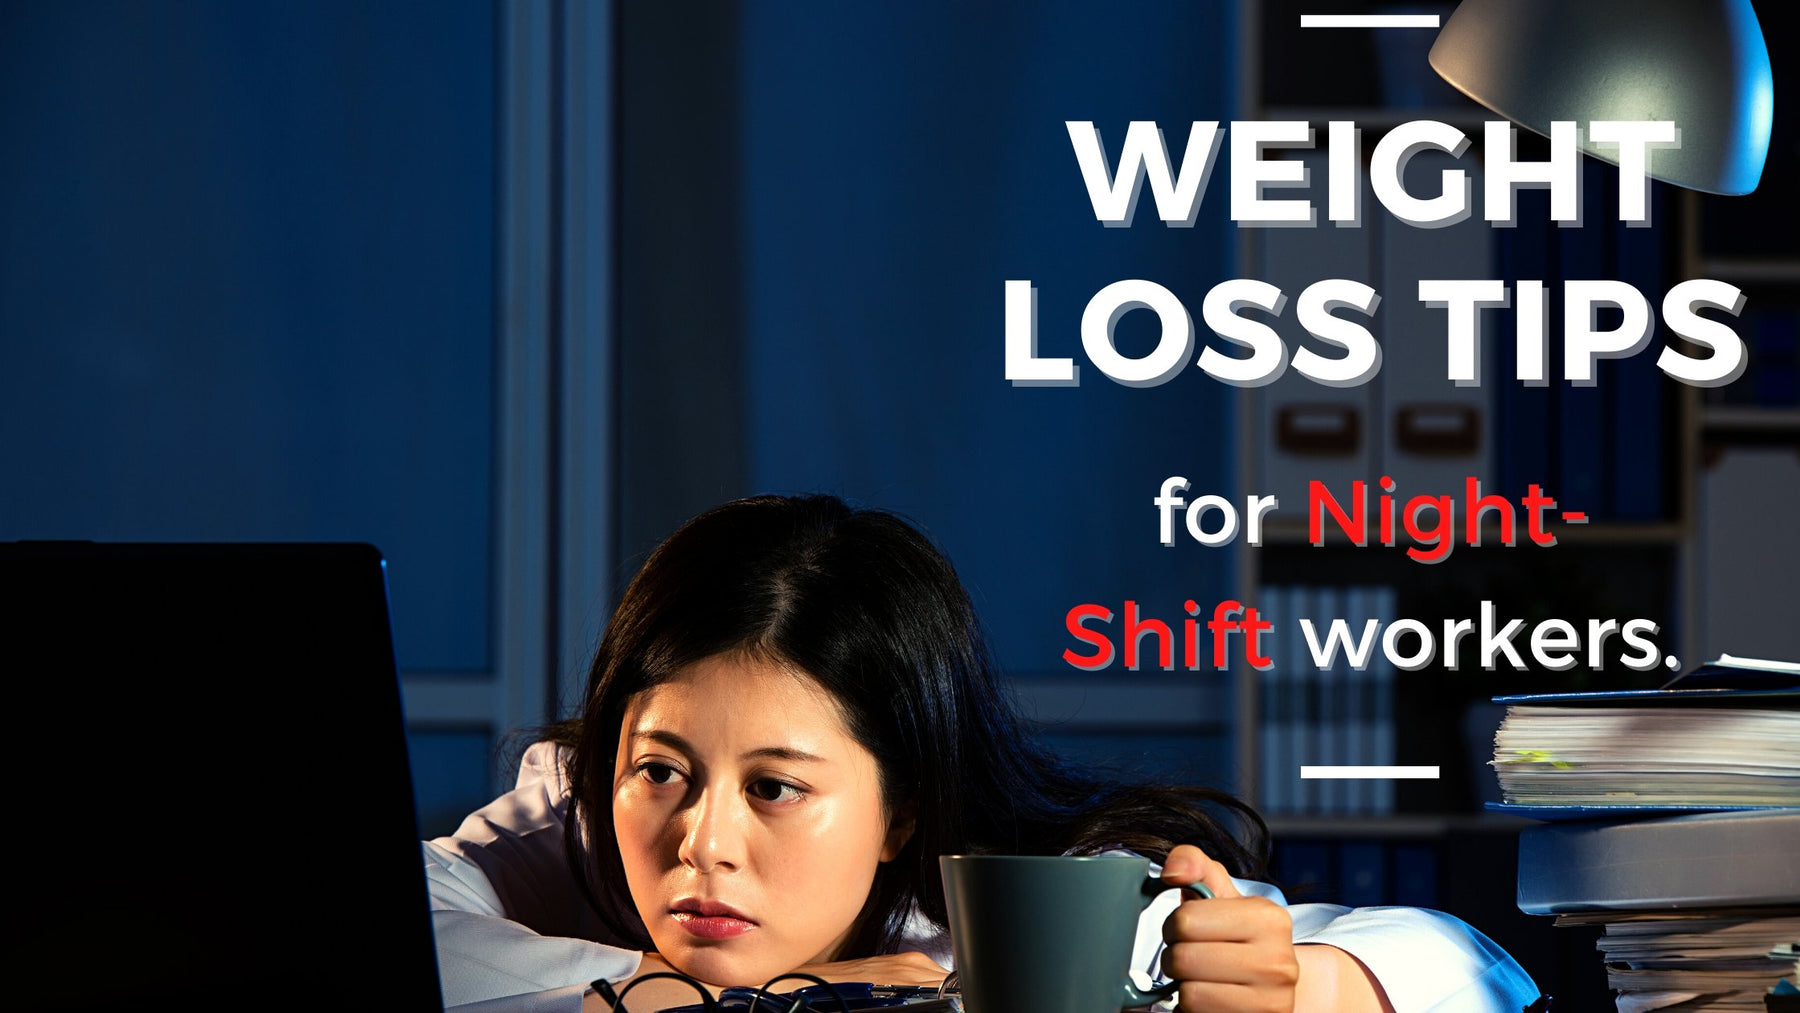 Indian Weight Loss Tips/Diet Plan for Night Shift Workers | Roshni Sanghvi